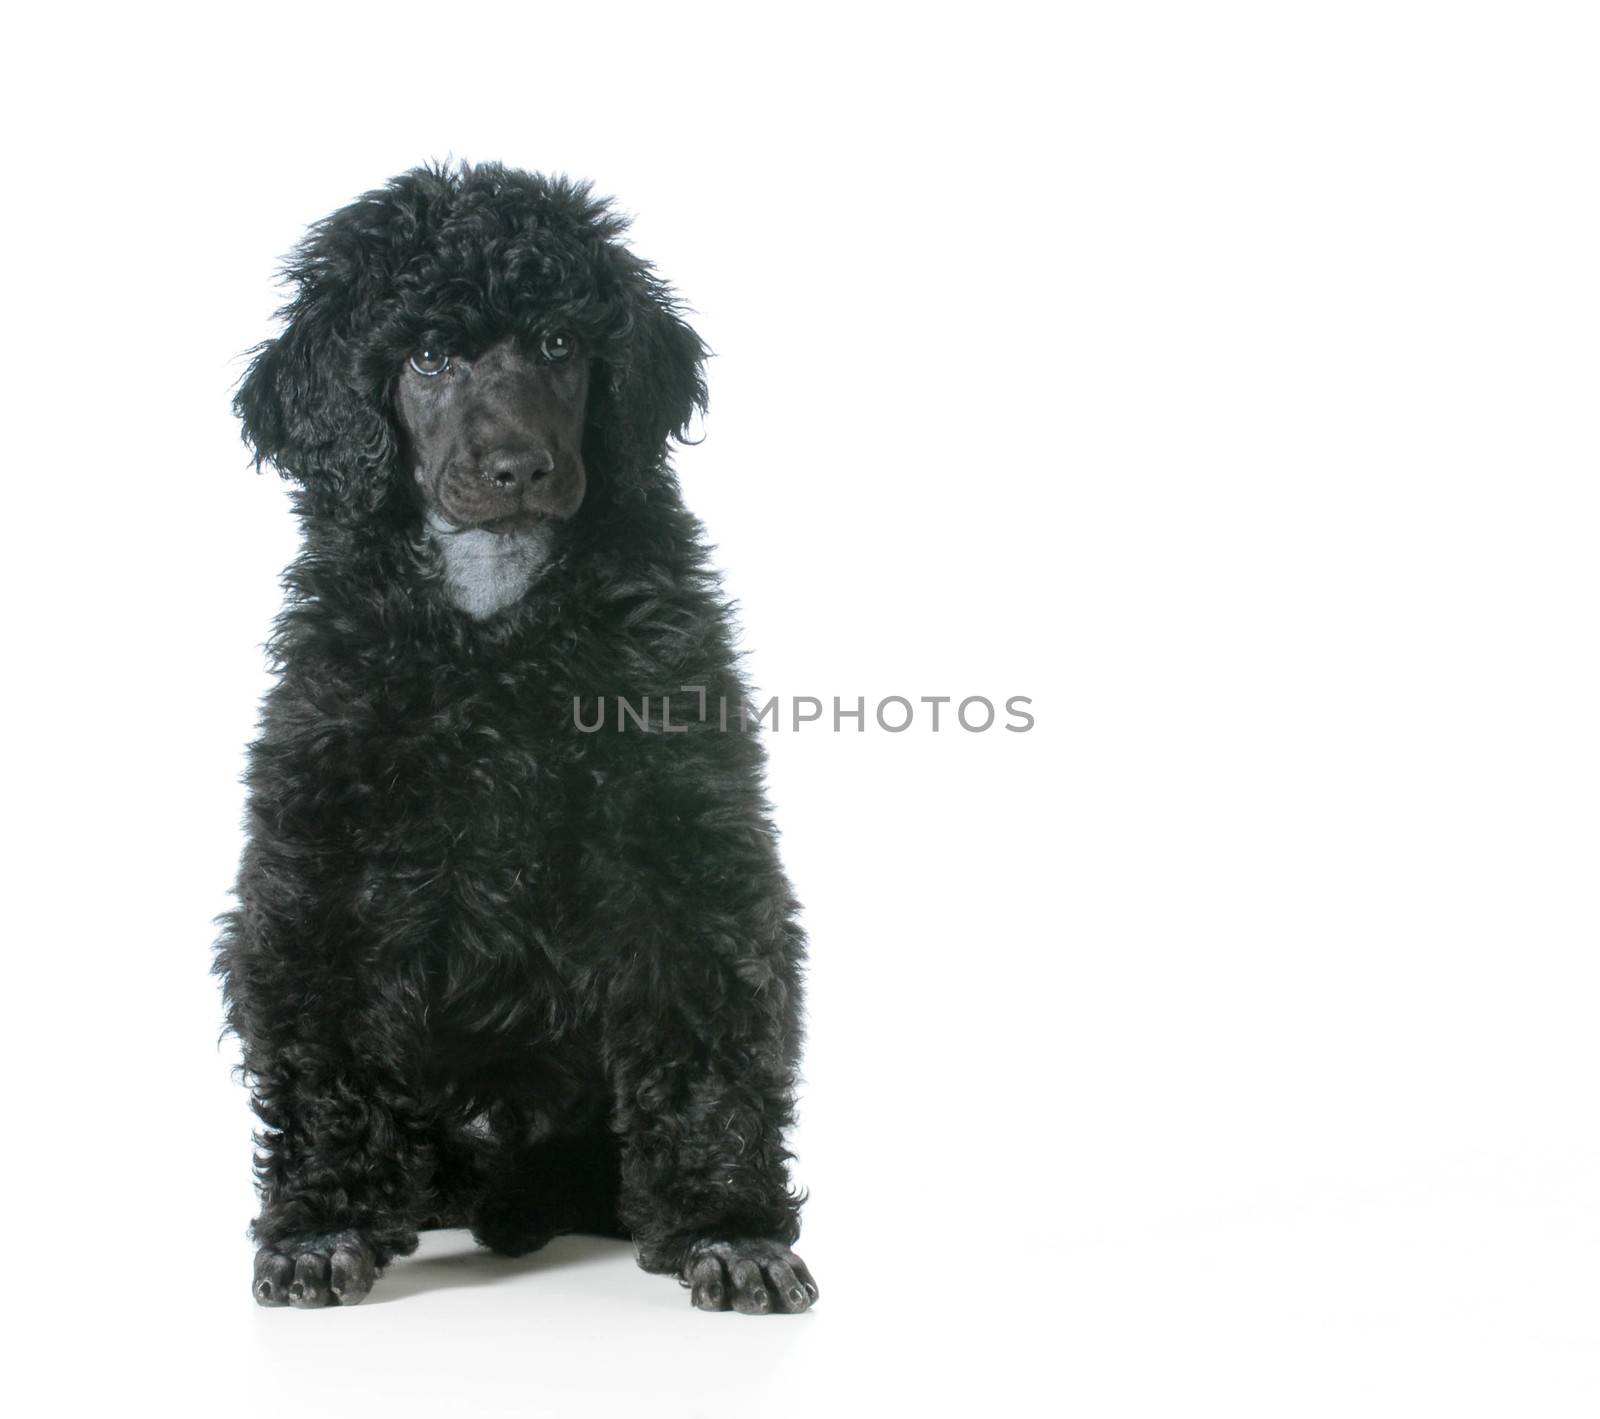 standard poodle puppy by willeecole123